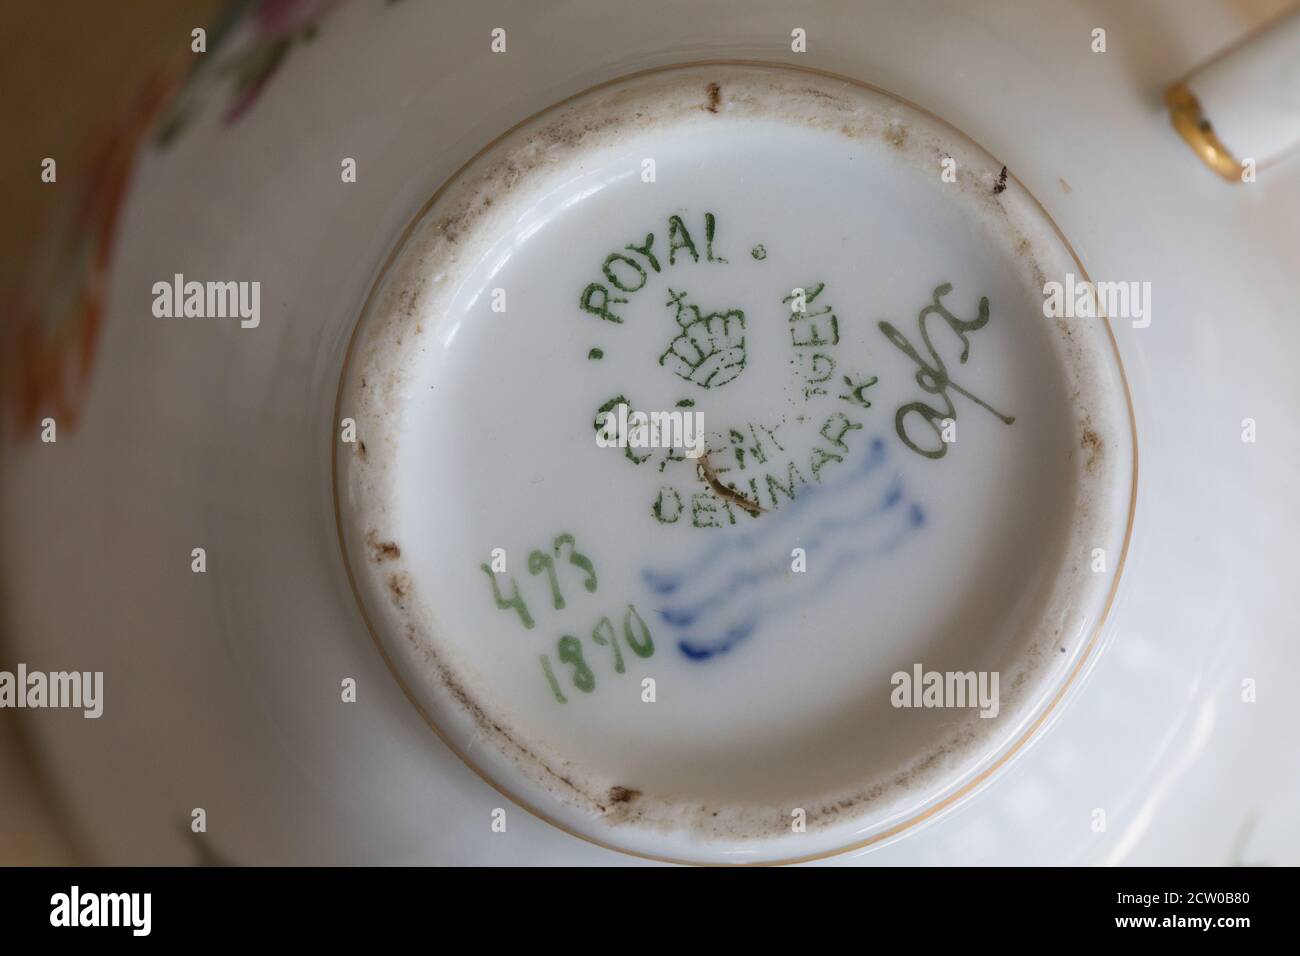 The three wavy lines which is the factory mark of Royal Copenhagen porcelain from Denmark. Stock Photo